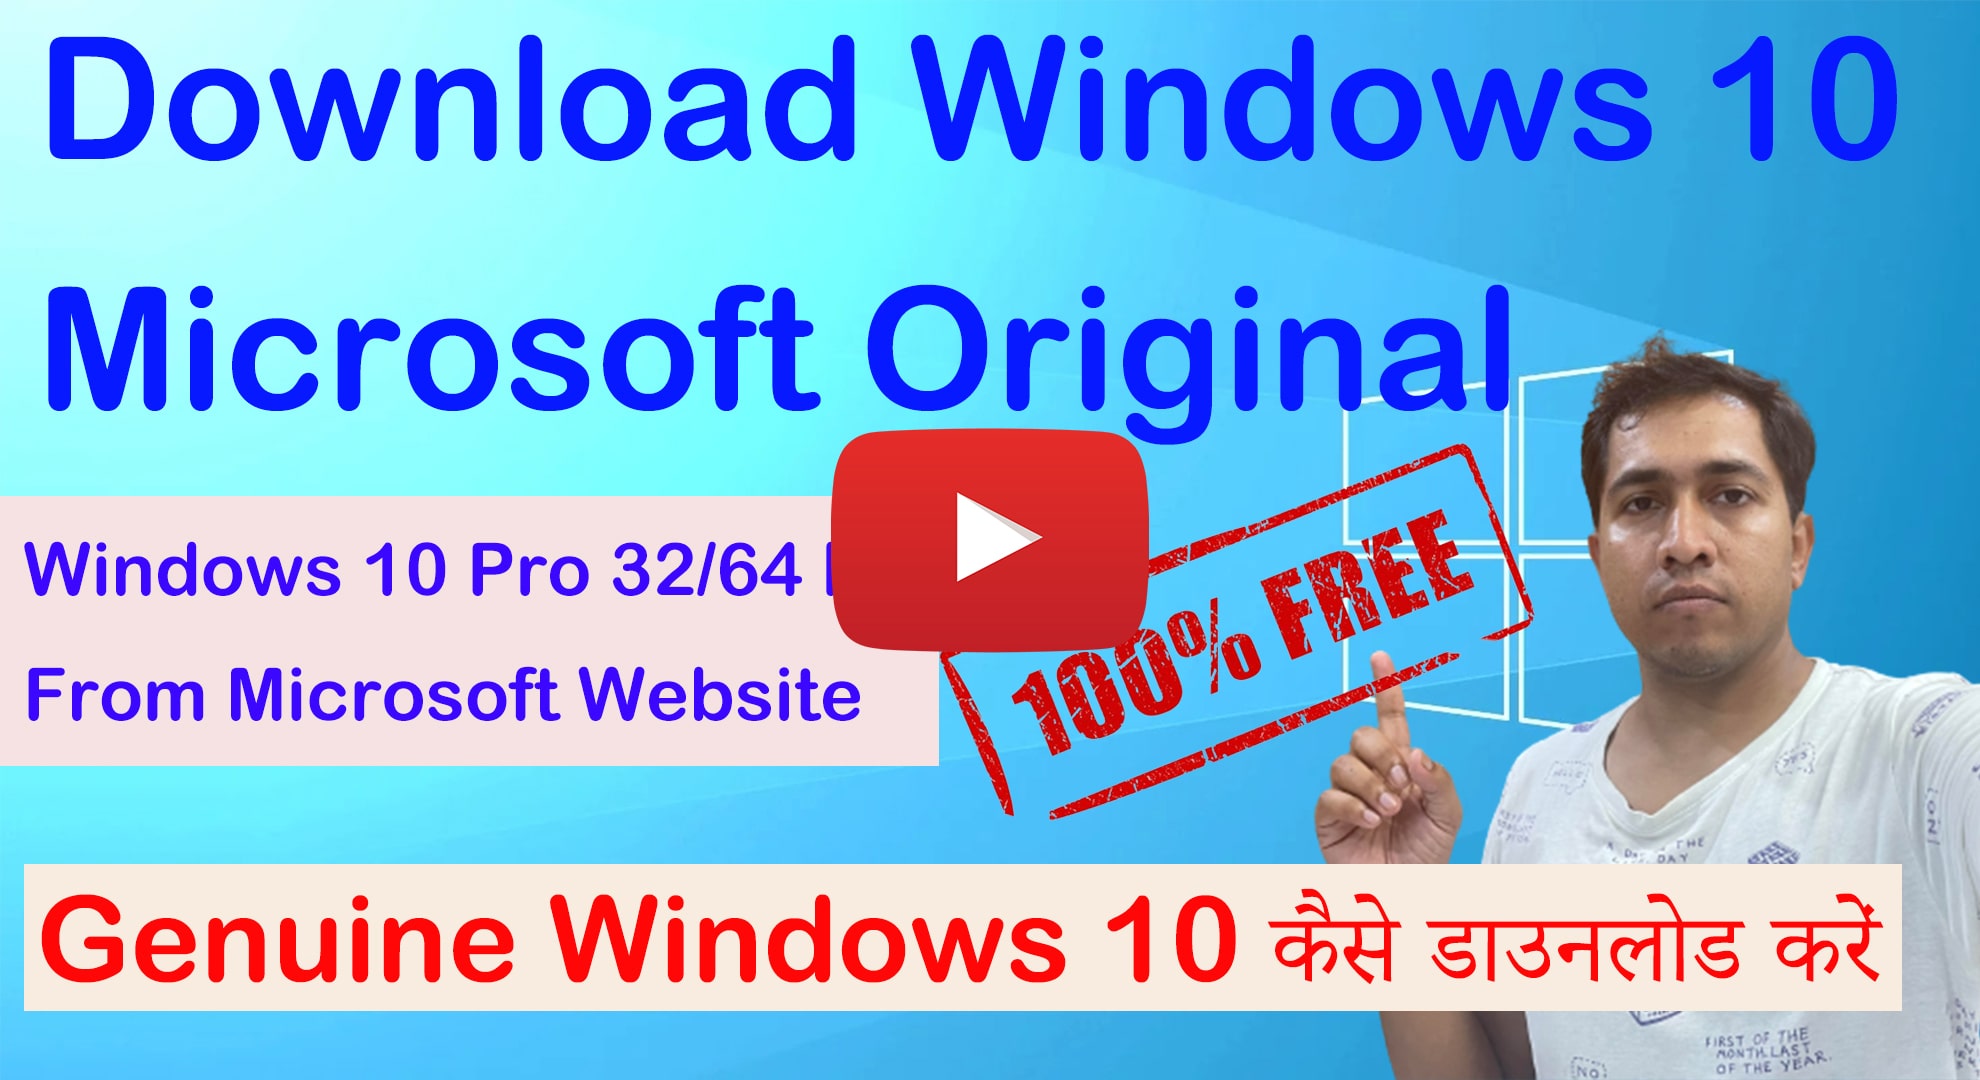 Free download Windows 10 - 32/64 bit from Microsoft official website